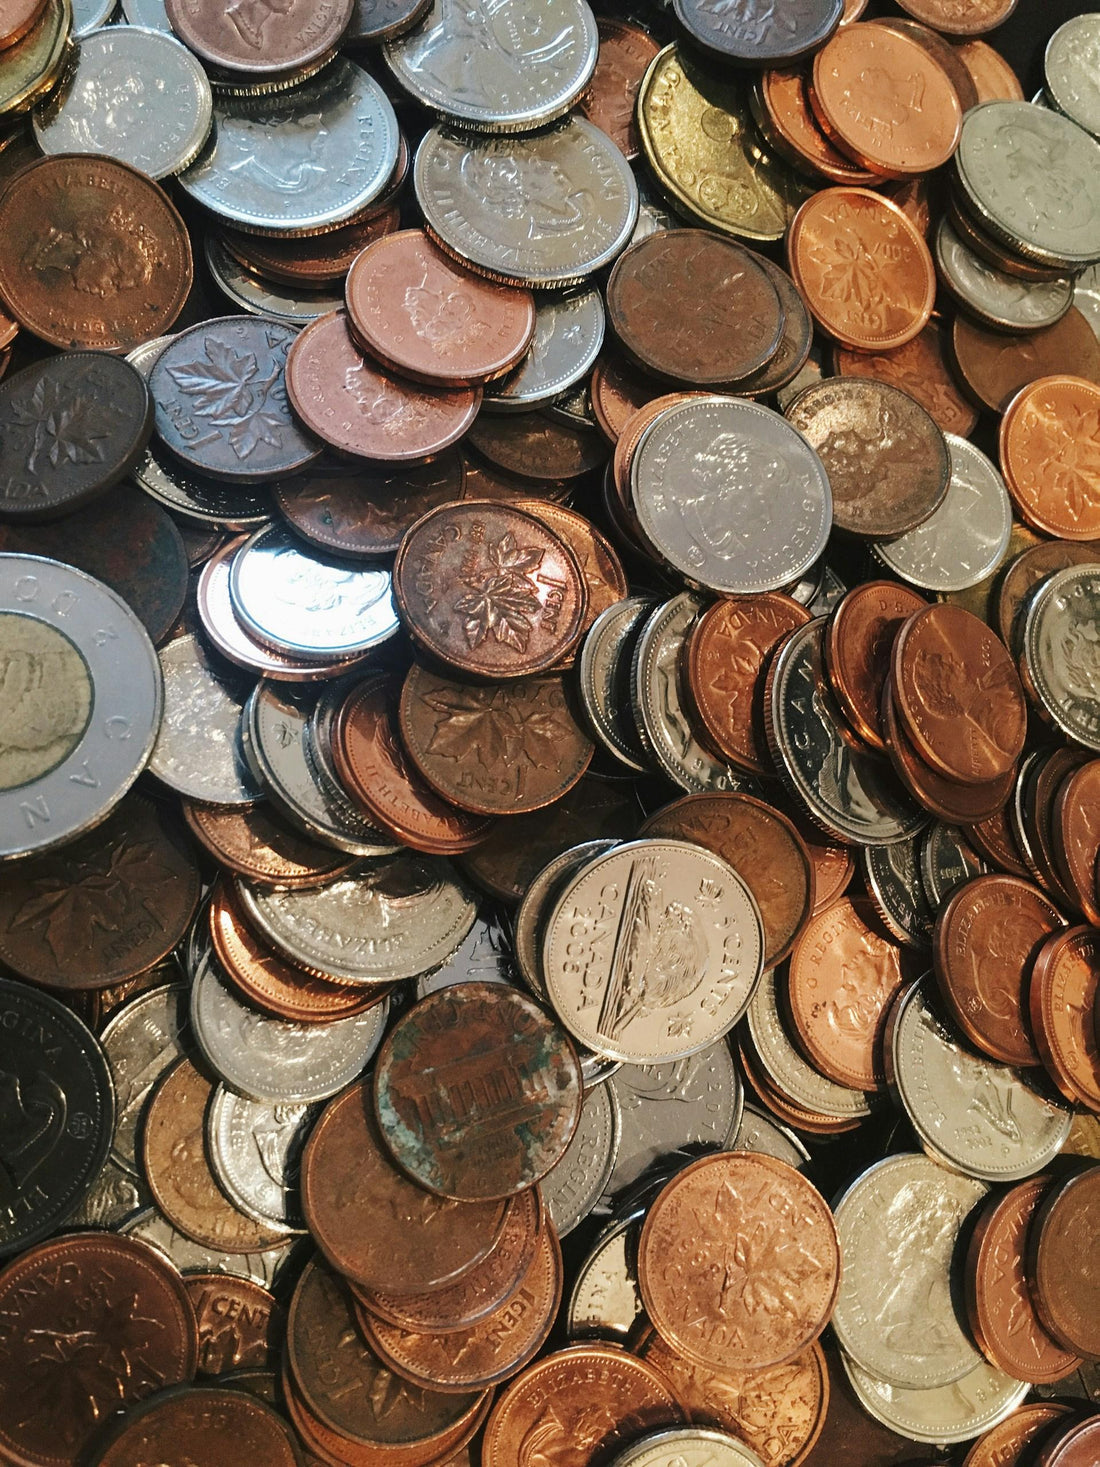 An unsorted collection of circulated Canadian coins